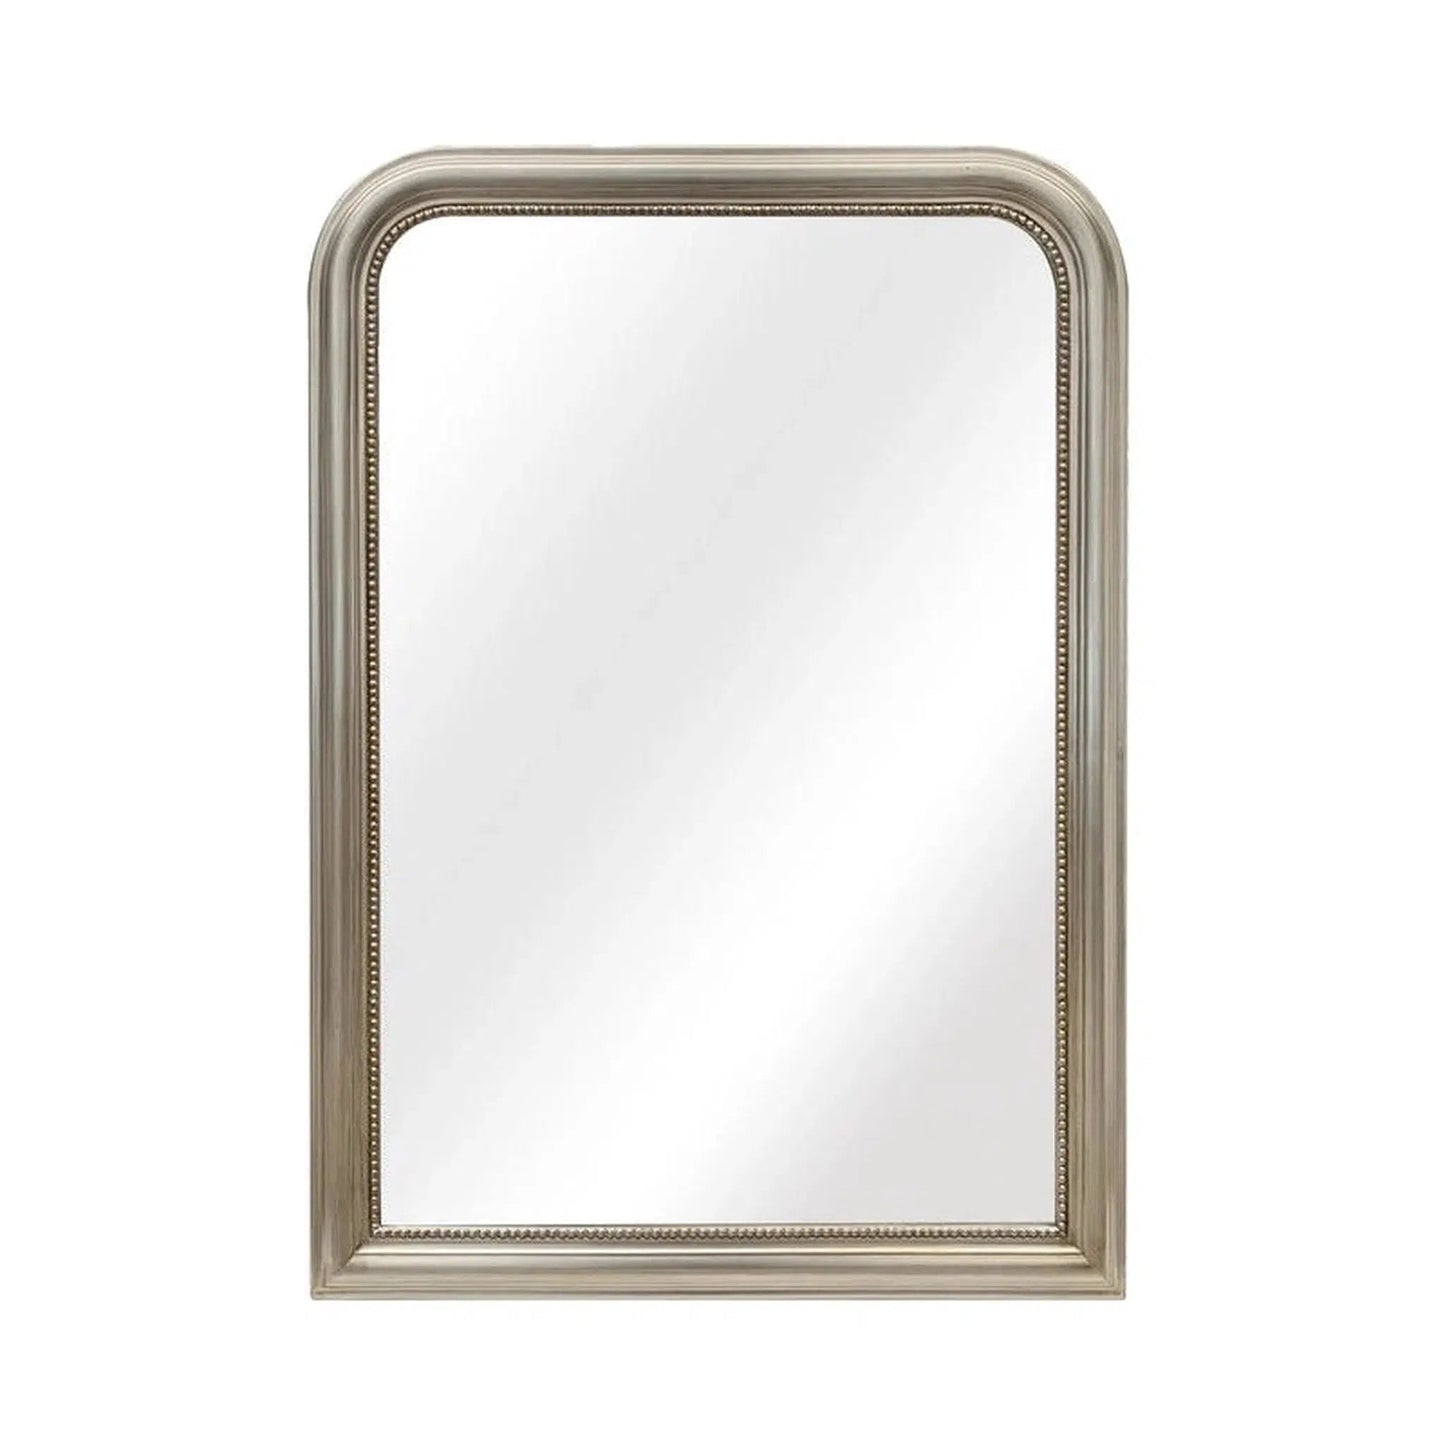 SBC Decor Duparc 42" x 76" Wall-Mounted Arched Wood Frame Leaner Mirror In Champagne Silver Finish